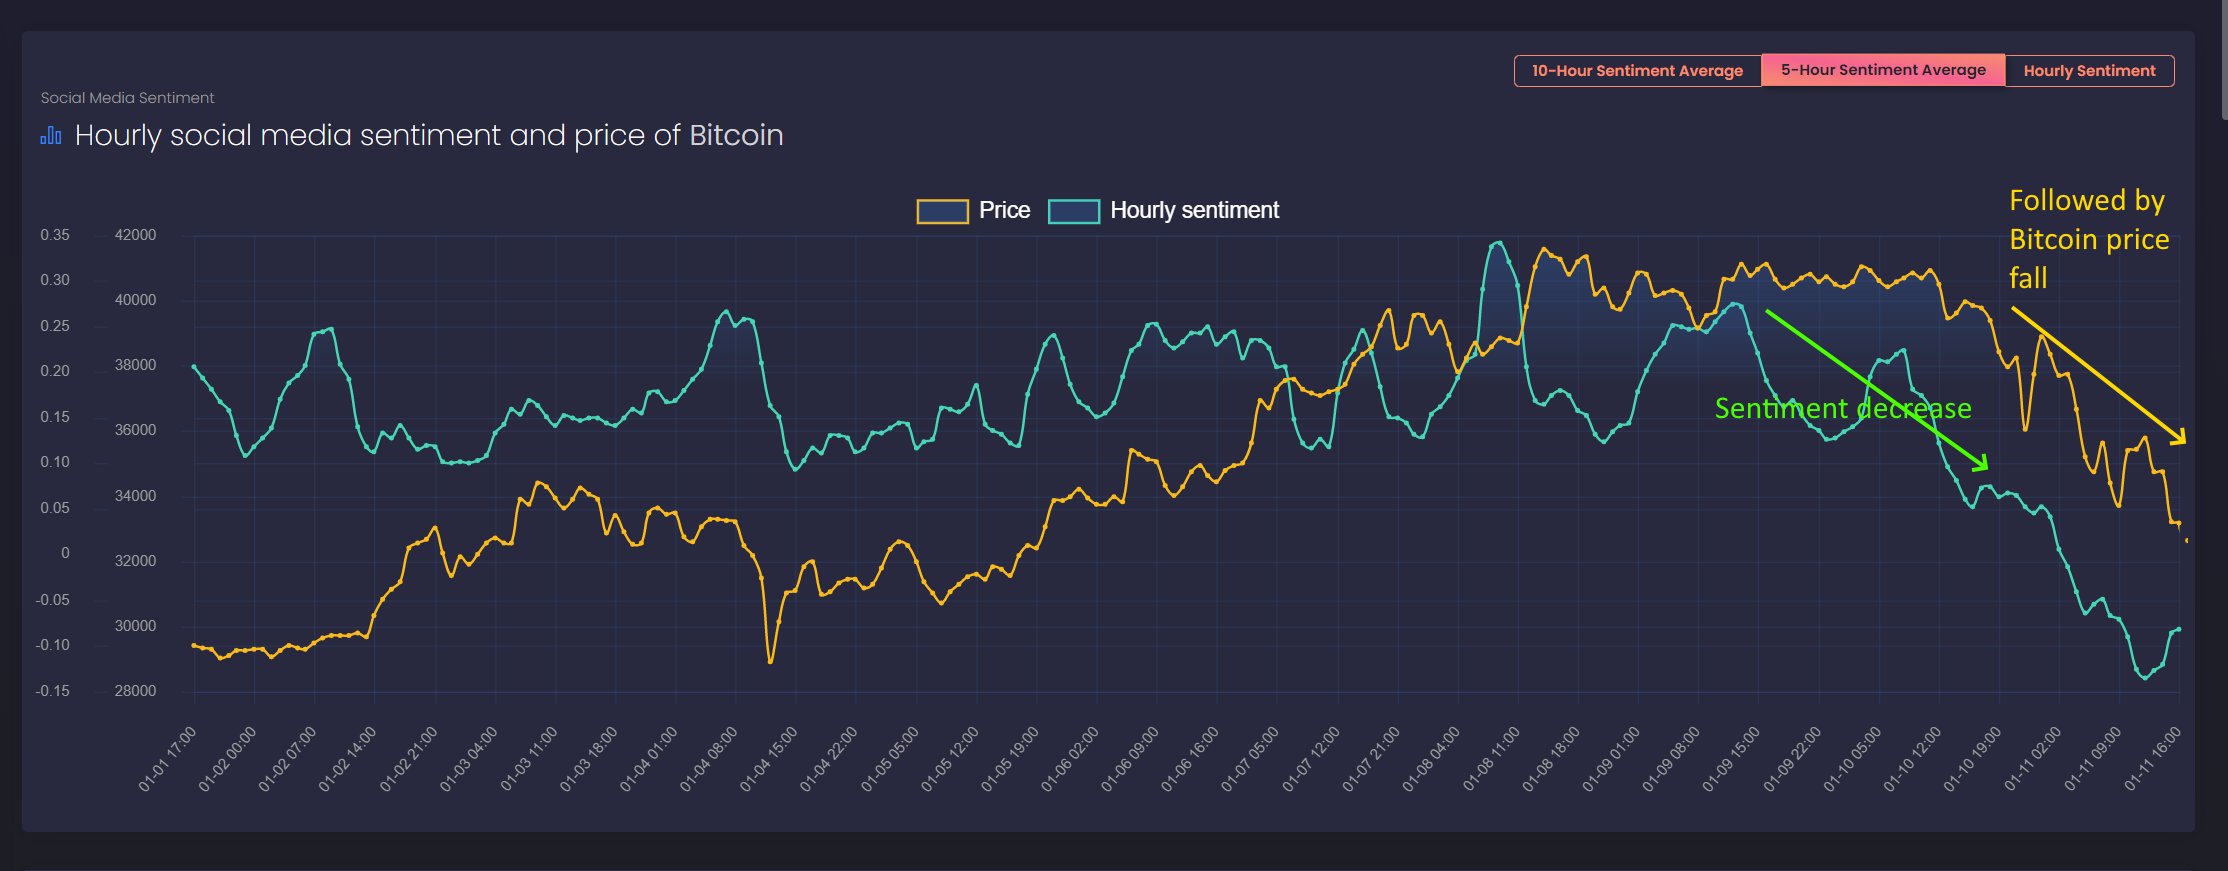 Social media sentiment drastically cooling down, followed by a 30% Bitcoin price correction from 41k USD